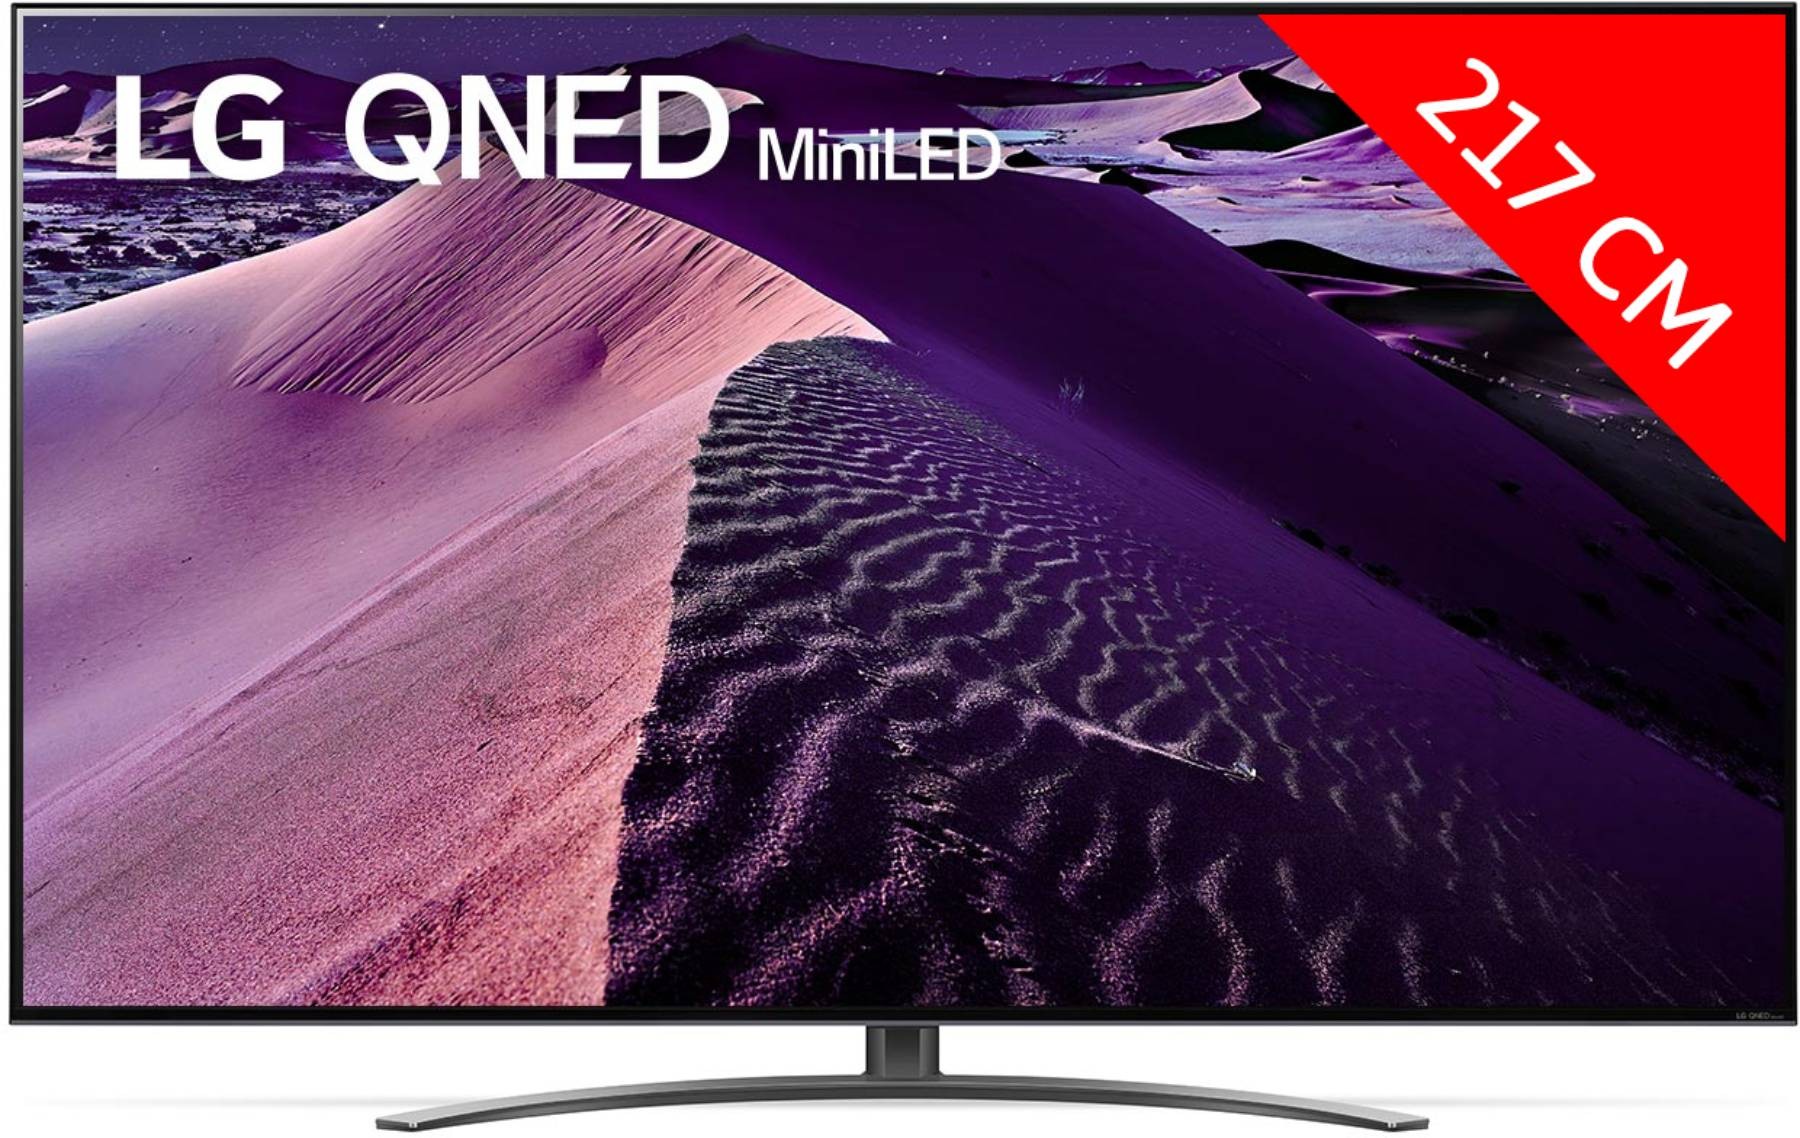 LG TV QNED 4K 217 cm 86"  86QNED86